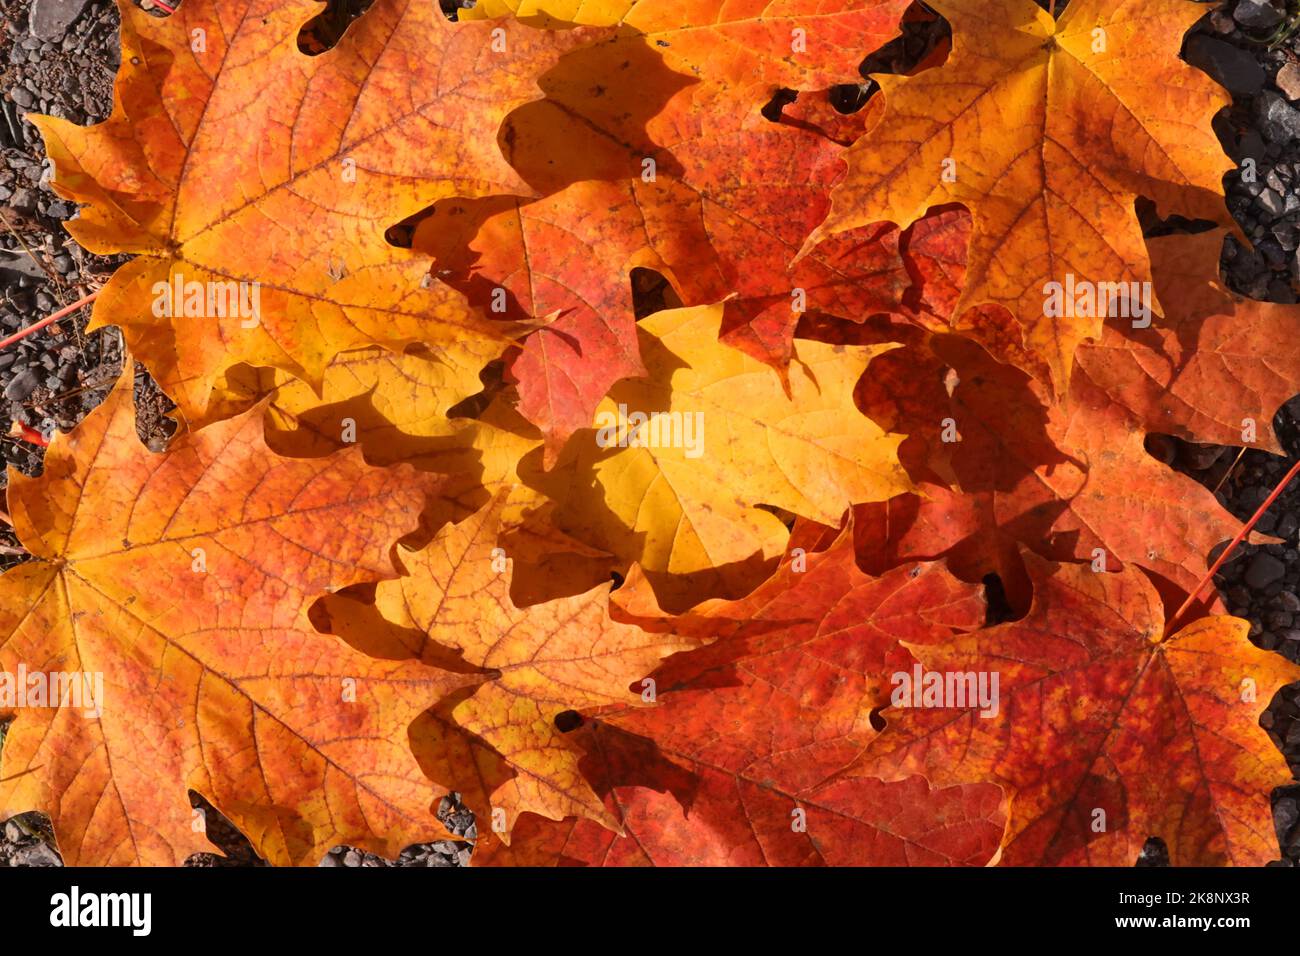 Fall leaves fallen off tree making carpet of colour underfoot Stock Photo